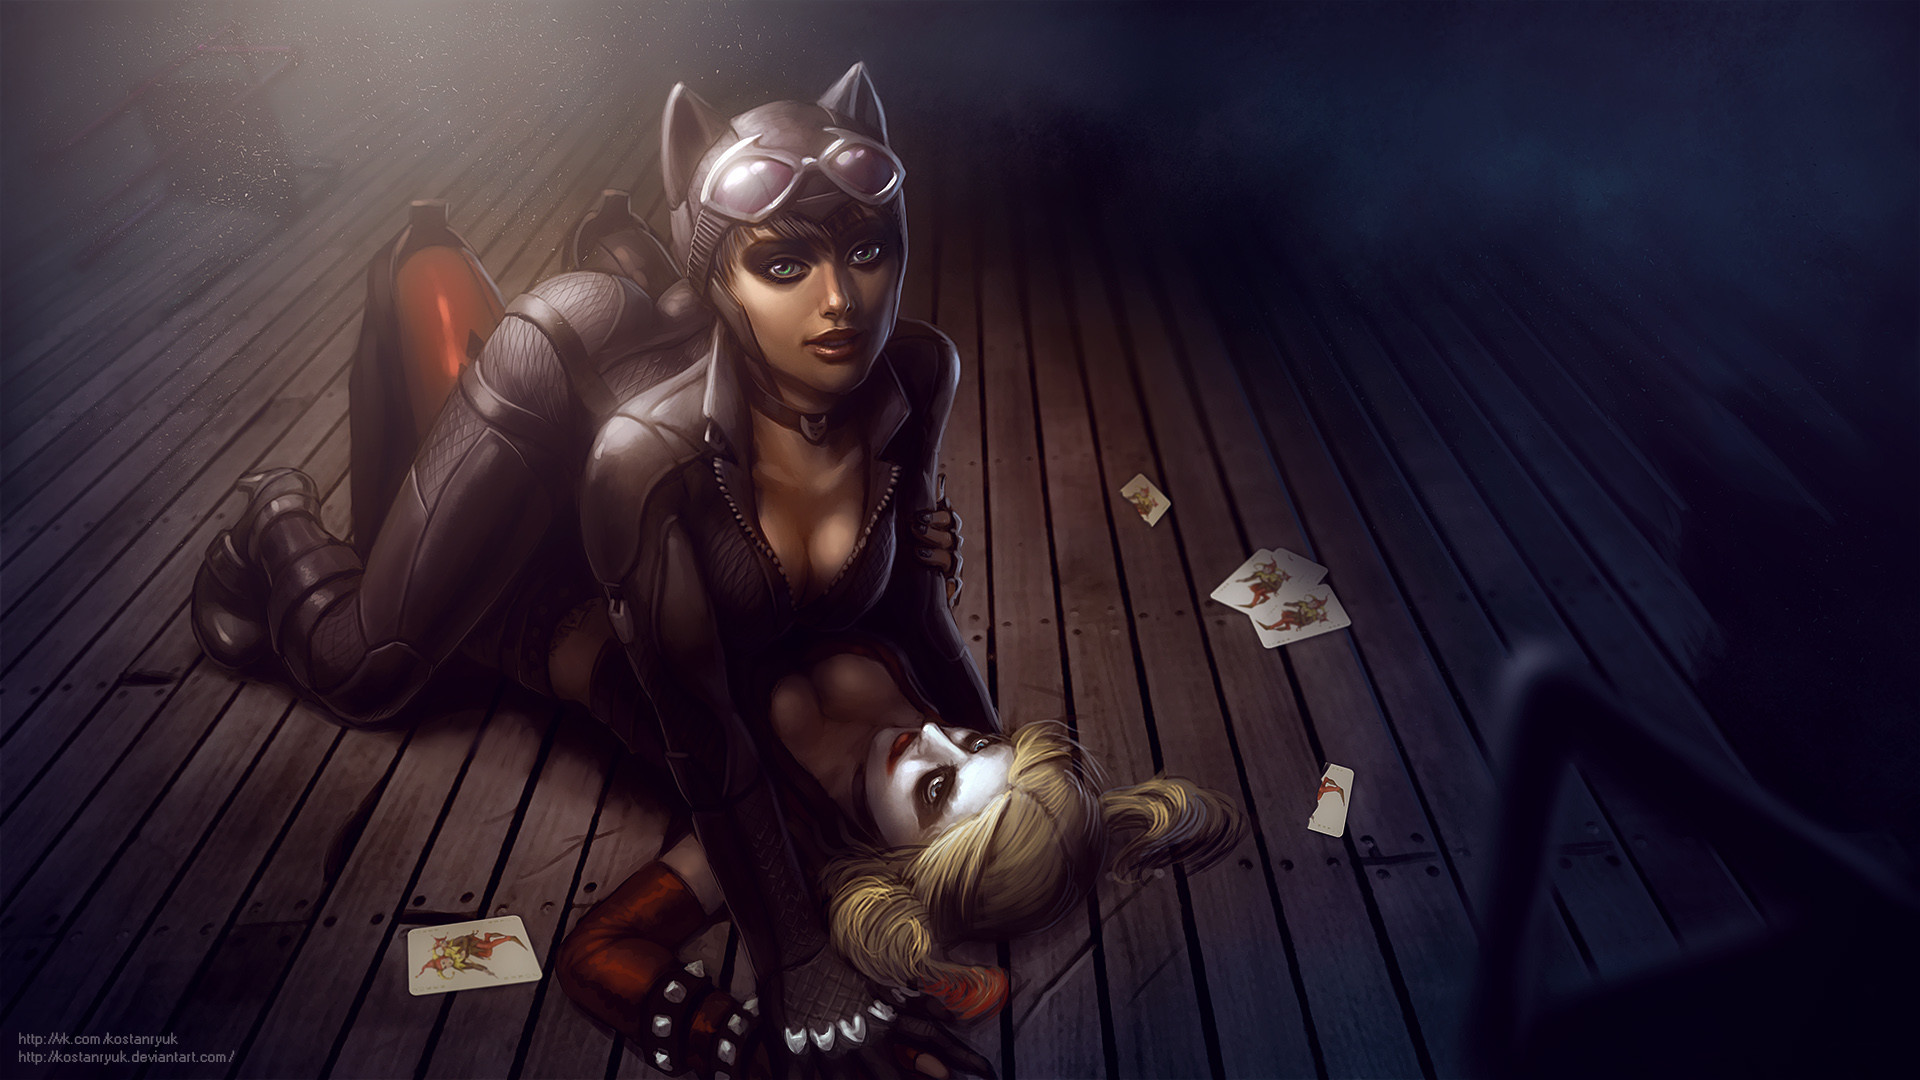 1920x1080 Video Game - Injustice: Gods Among Us Catwoman Harley Quinn Wallpaper